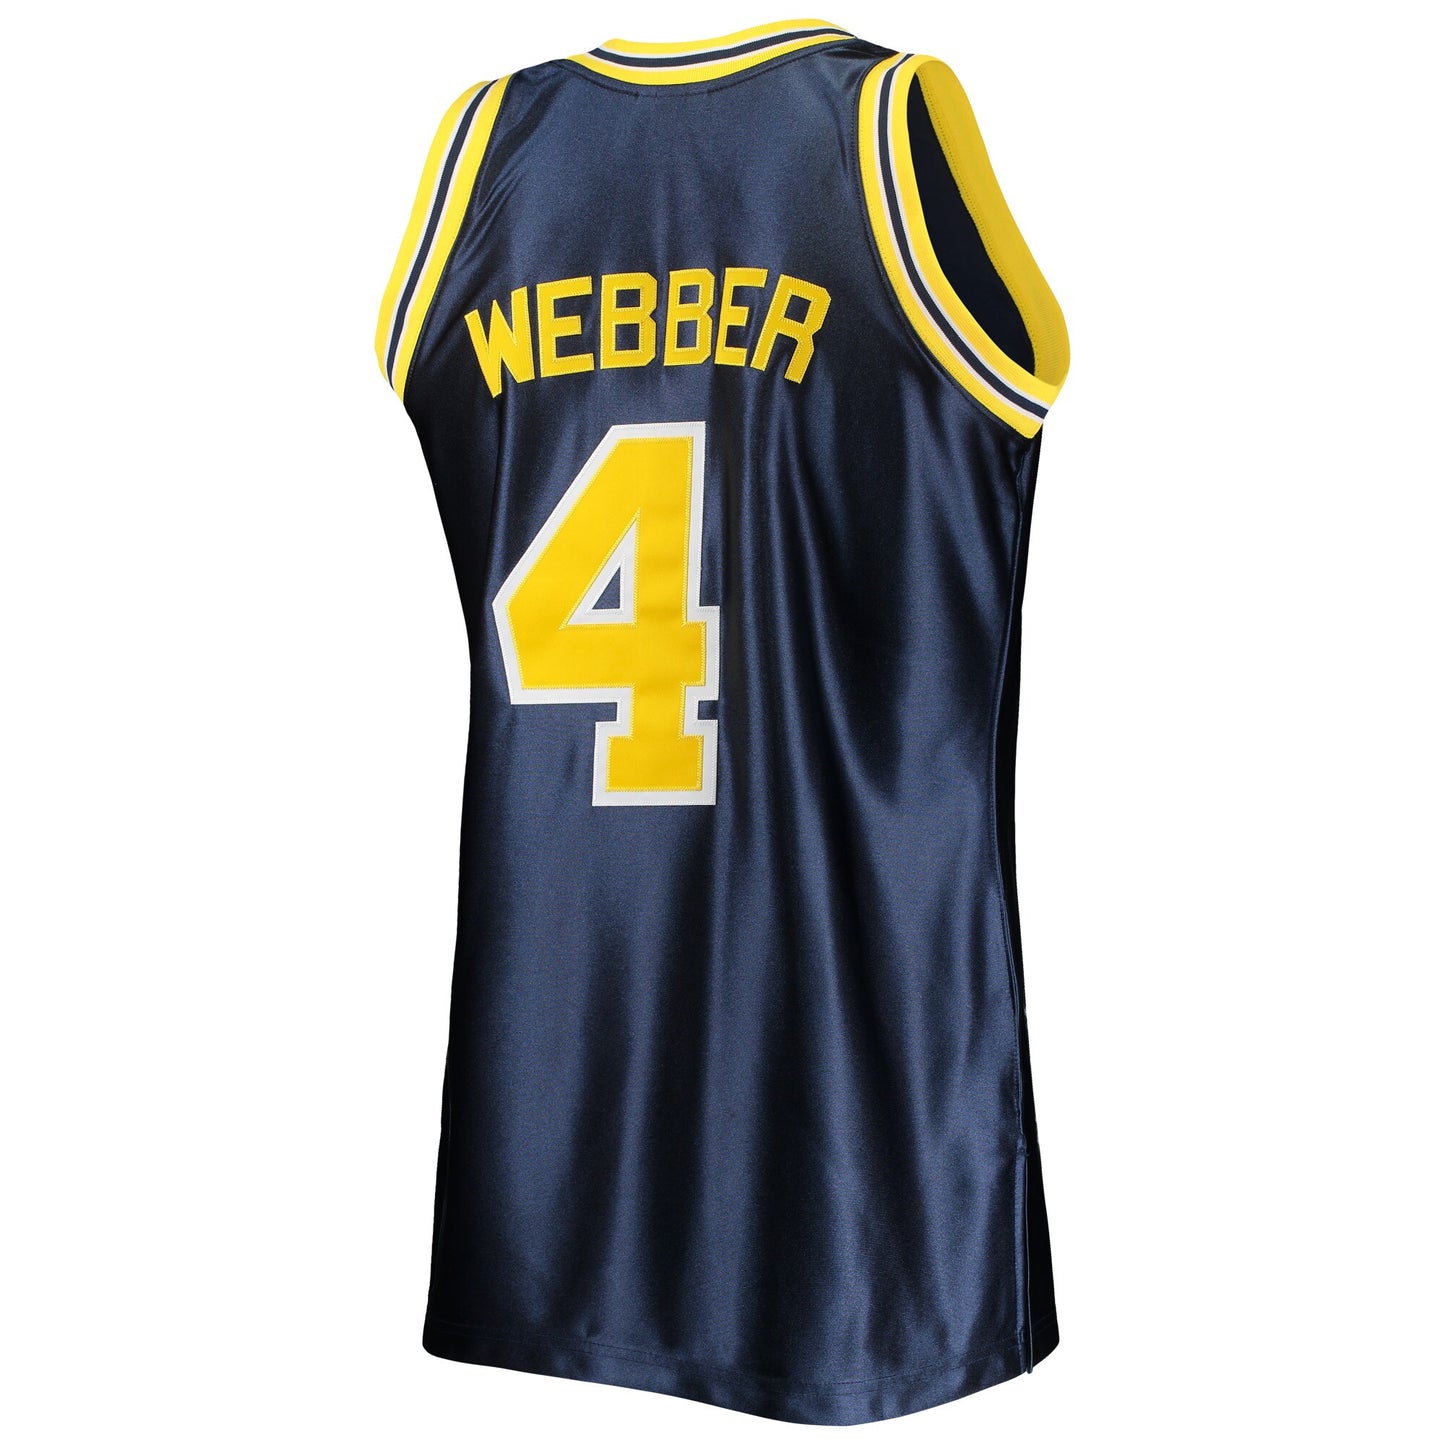 Chris Webber Michigan Wolverines Mitchell & Ness 1991-92 Authentic Throwback College Jersey - Navy